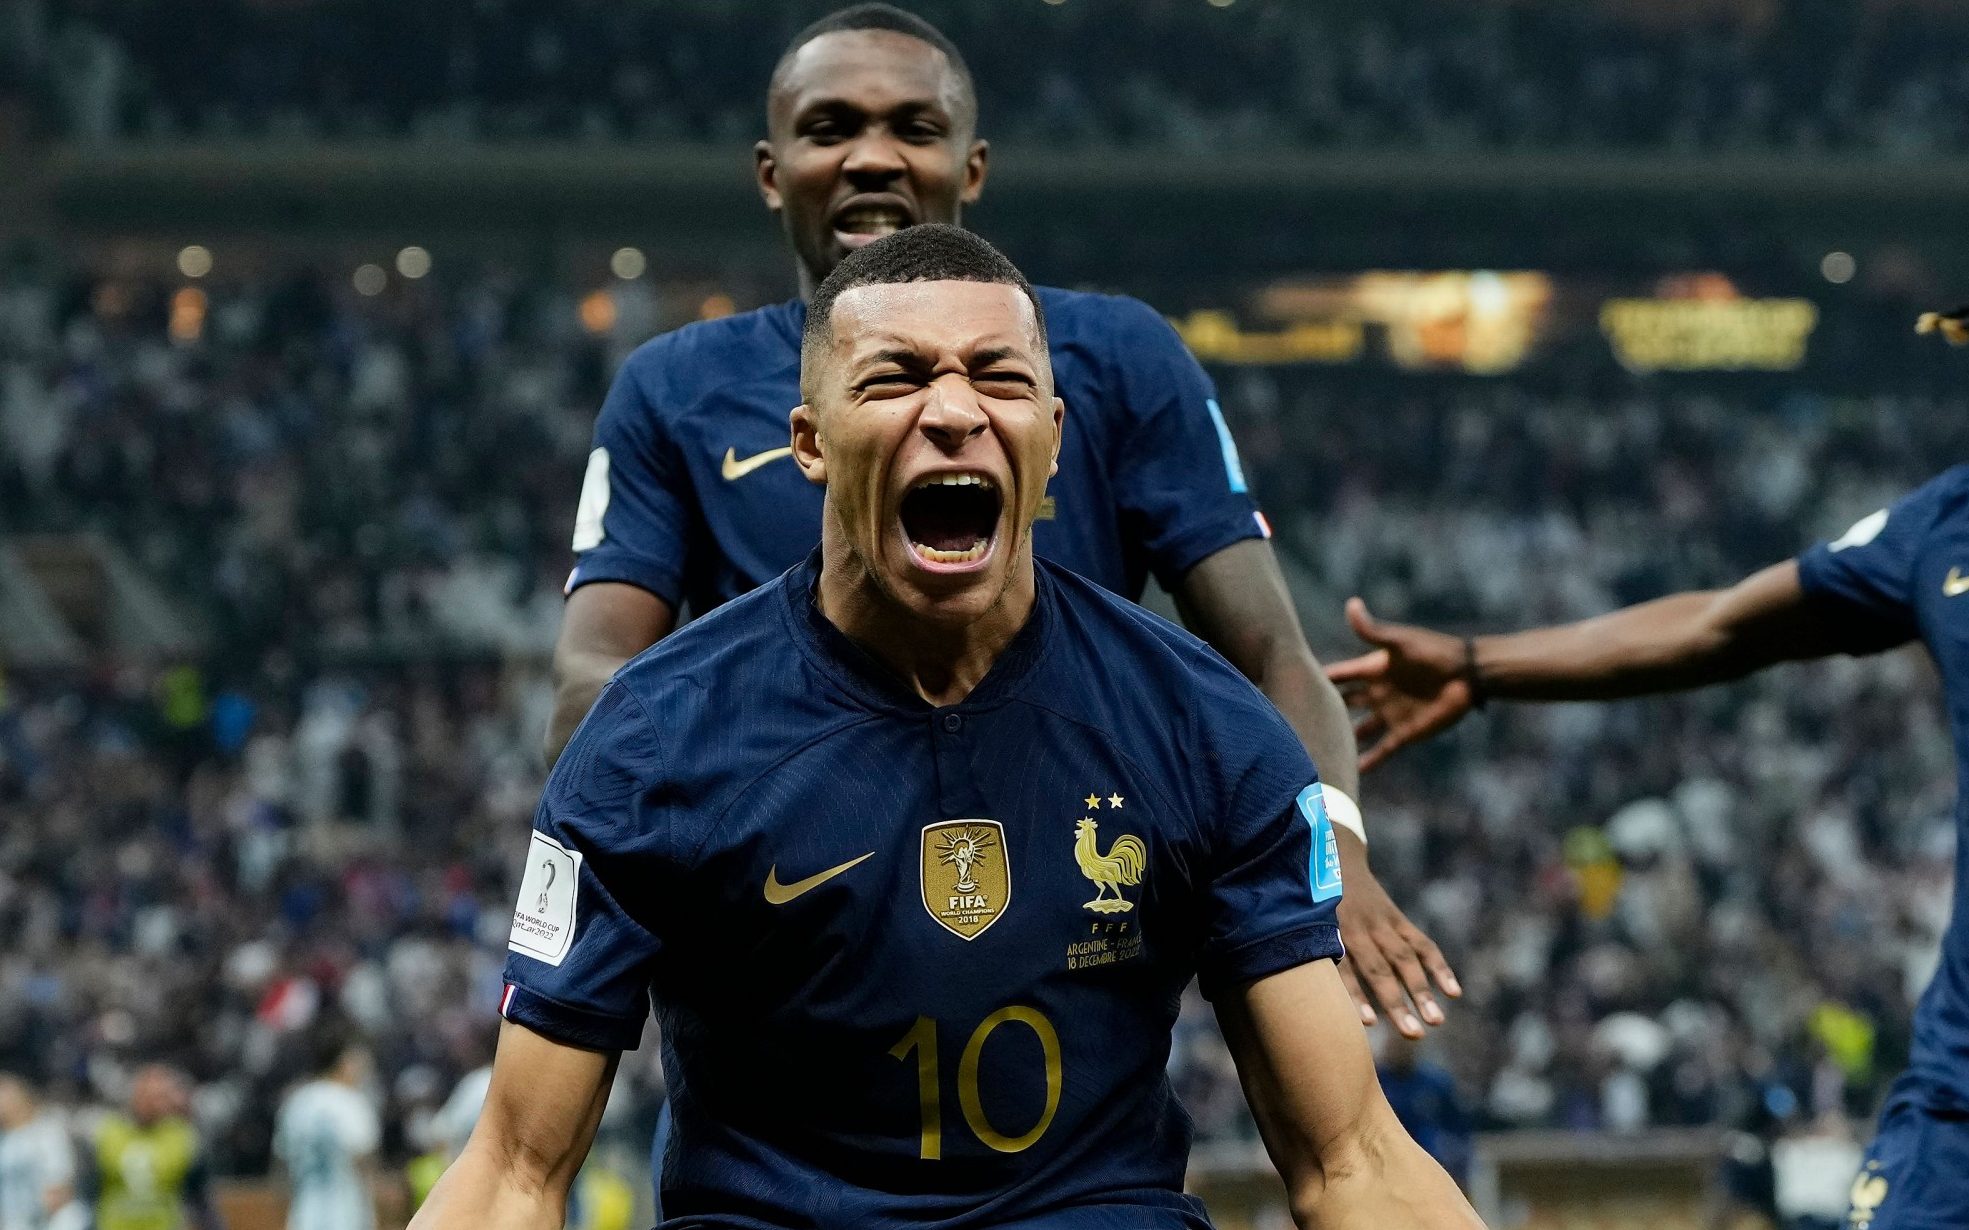 France failed to defend the World Cup title as they fell short to Argentina on penalties in one of the most breathtaking finals in history